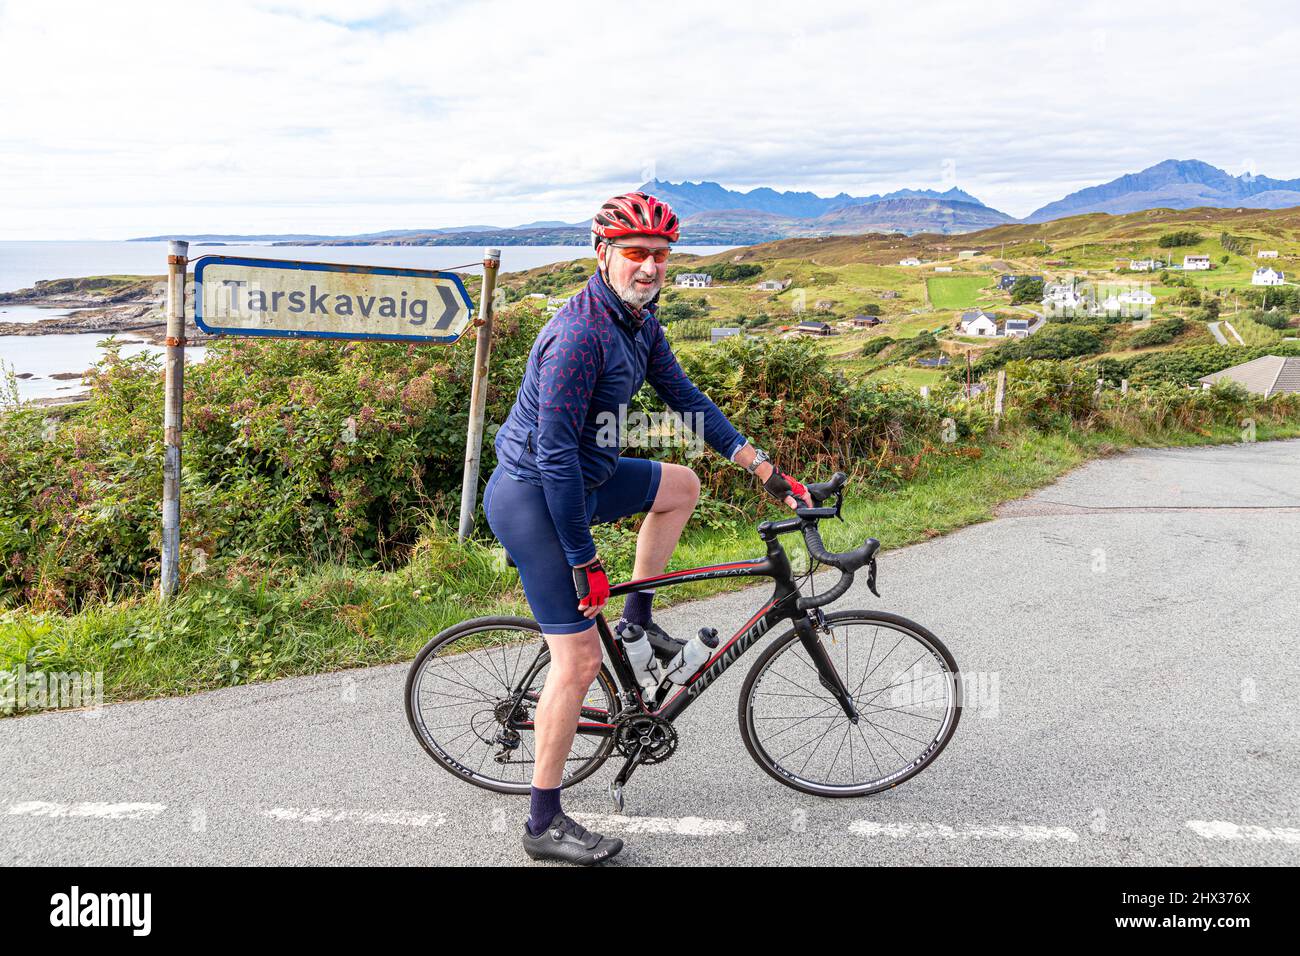 A cyclist at the village of Tarskavaig on Tarskavaig Bay on the Sleat Penisula in the south of the Isle of Skye, Highland, Scotland UK. The Cuillins a Stock Photo